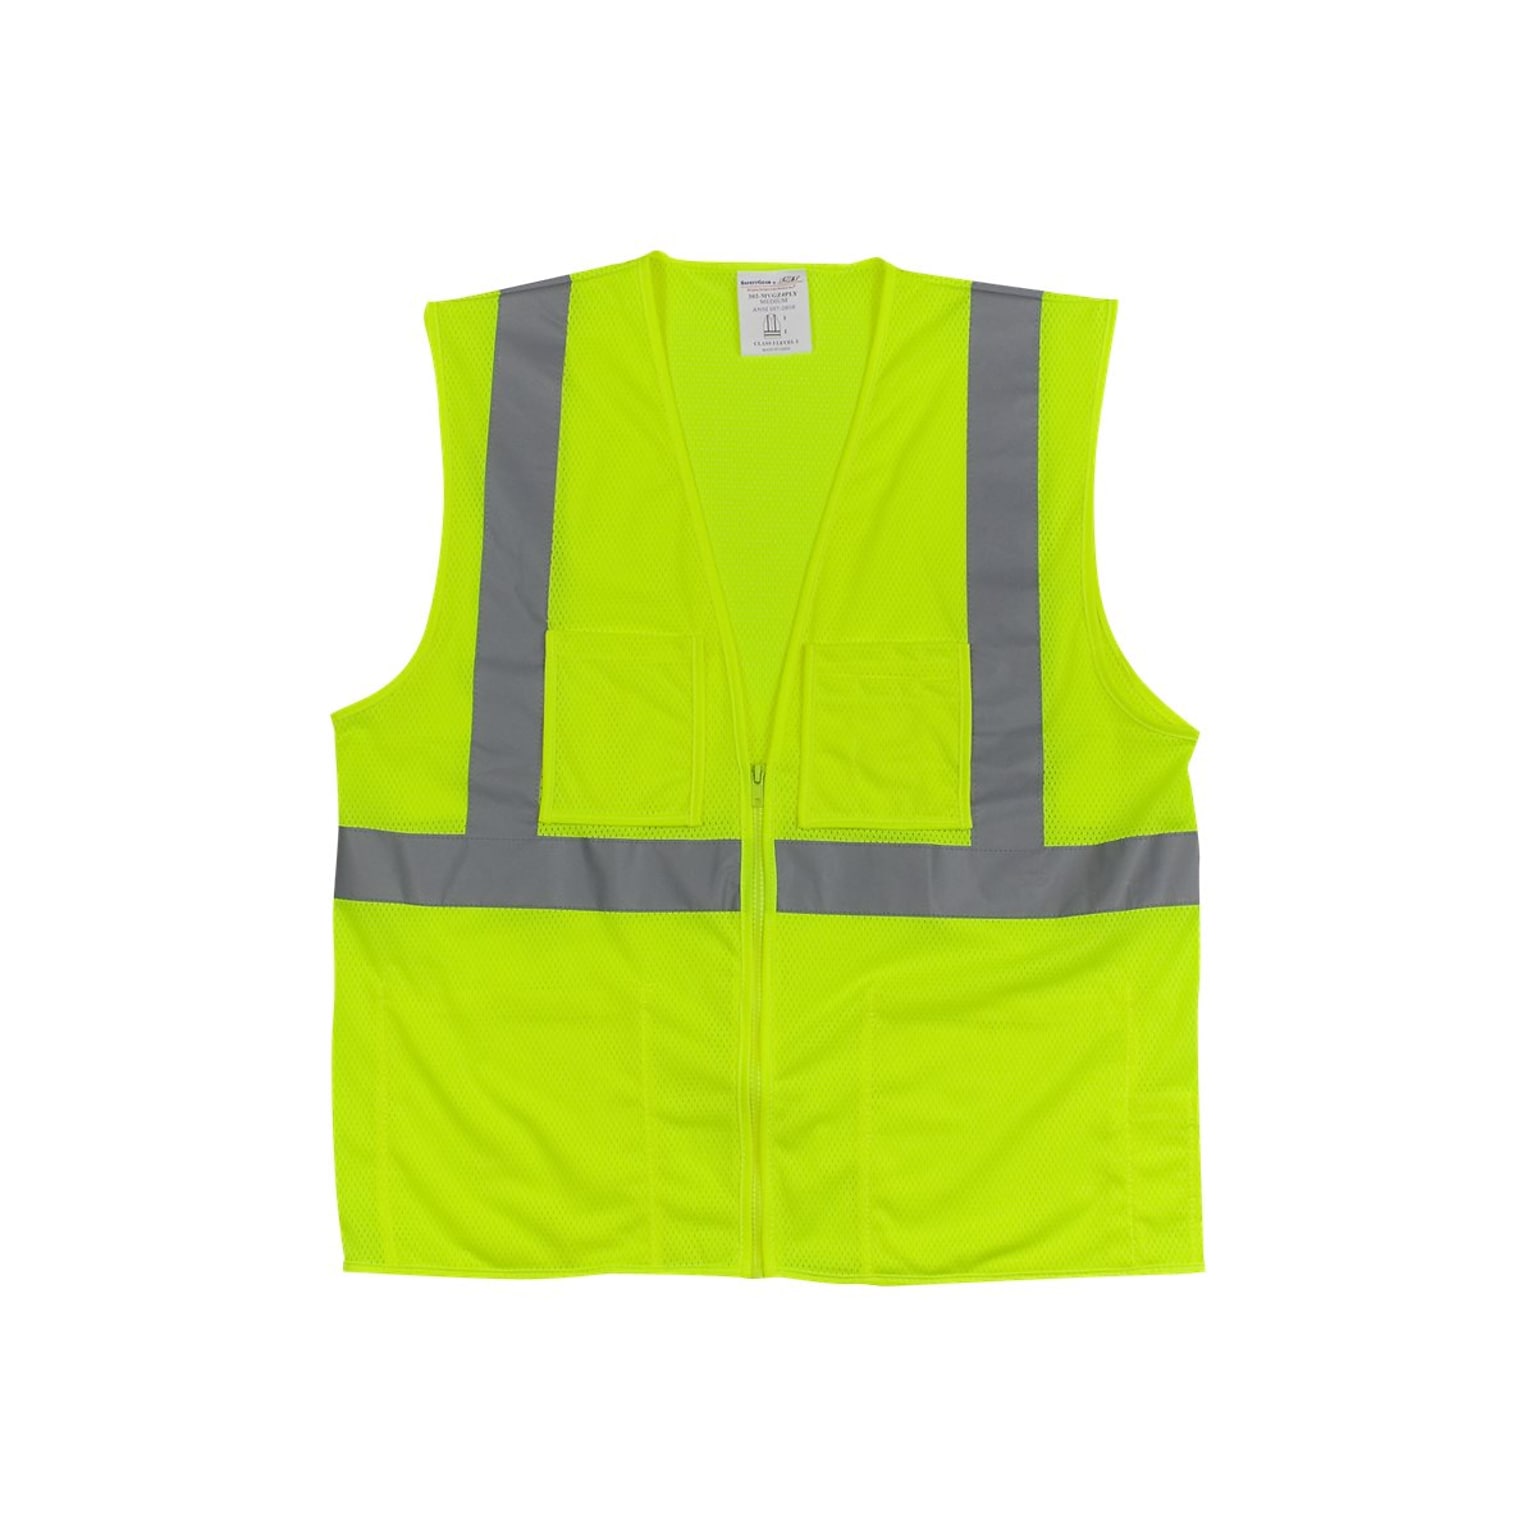 Protective Industrial Products High Visibility Sleeveless Safety Vest, ANSI Class R2, Lime Yellow, 2XL (302-MVGZ4PLY-2X)